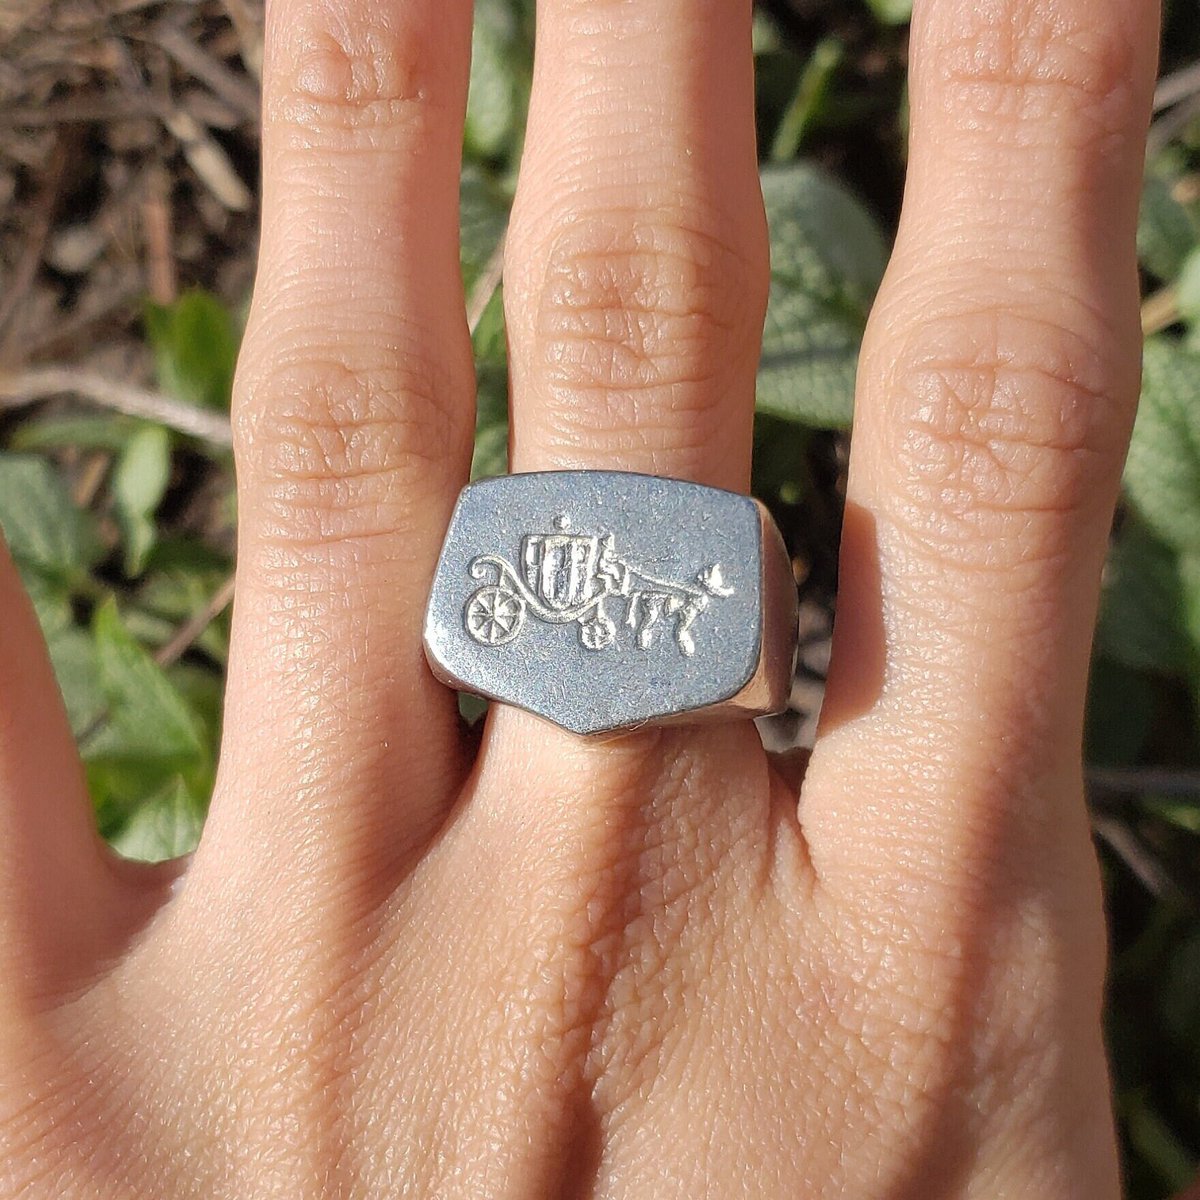 Excited to share the latest addition to my #etsy shop: Carriage wax seal signet ring etsy.me/433tilr #silver #nobility #pewter #fantasyscifi #victorian #euro #princess #carriage #royal #chariot #horse #signetring #ring #jewelry #wax #seal #stamp #cinderella